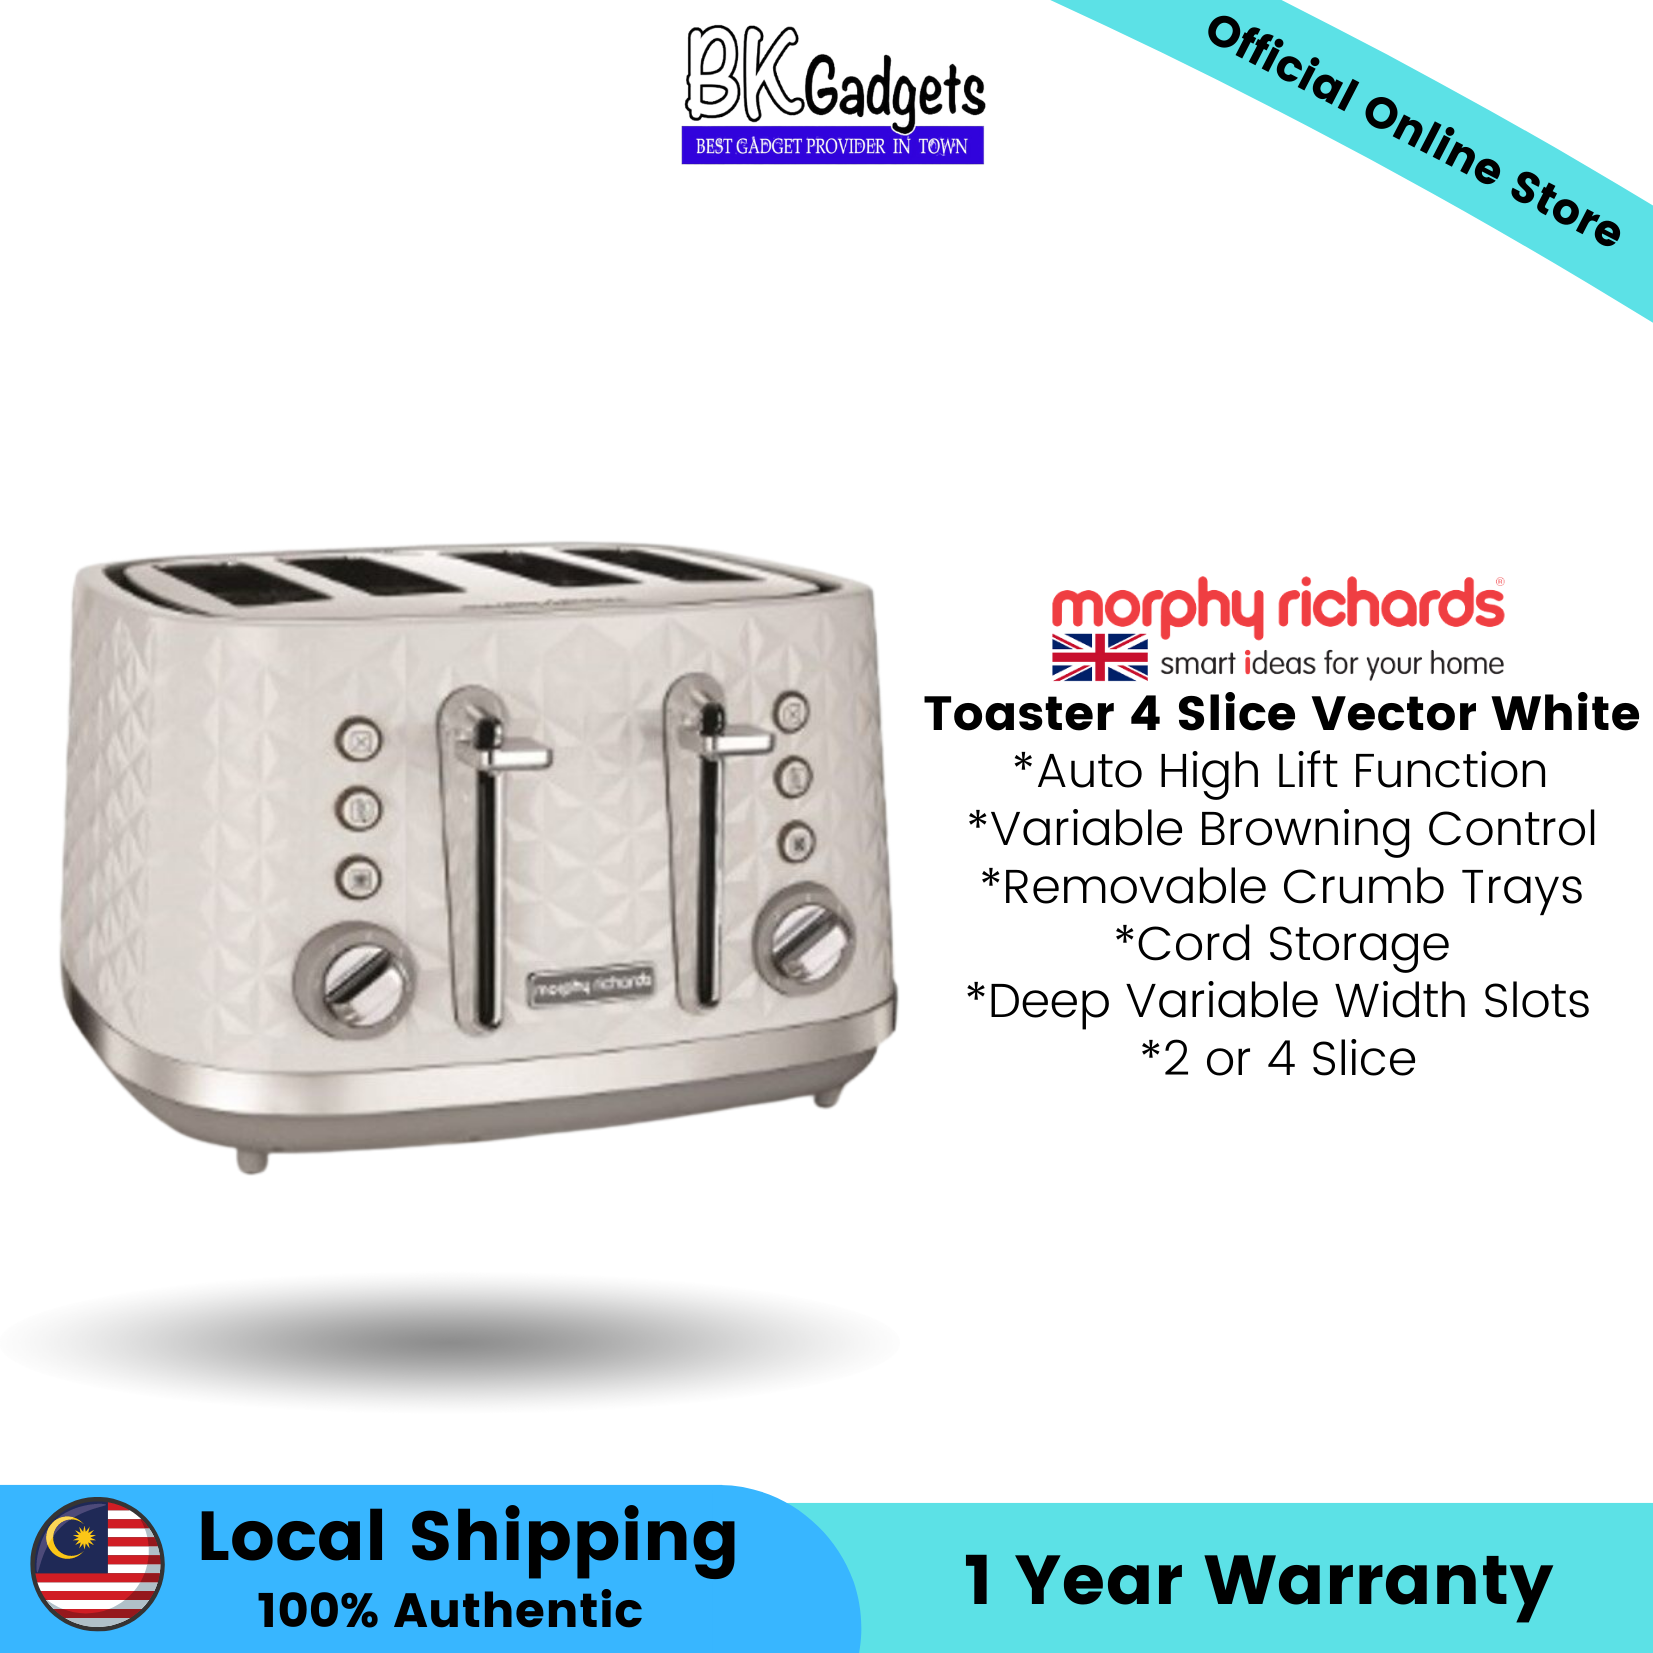 Morphy Richards Toaster 4 Slice Vector White - Variable Browning Control | Removable Crumb Trays | Cord Storage